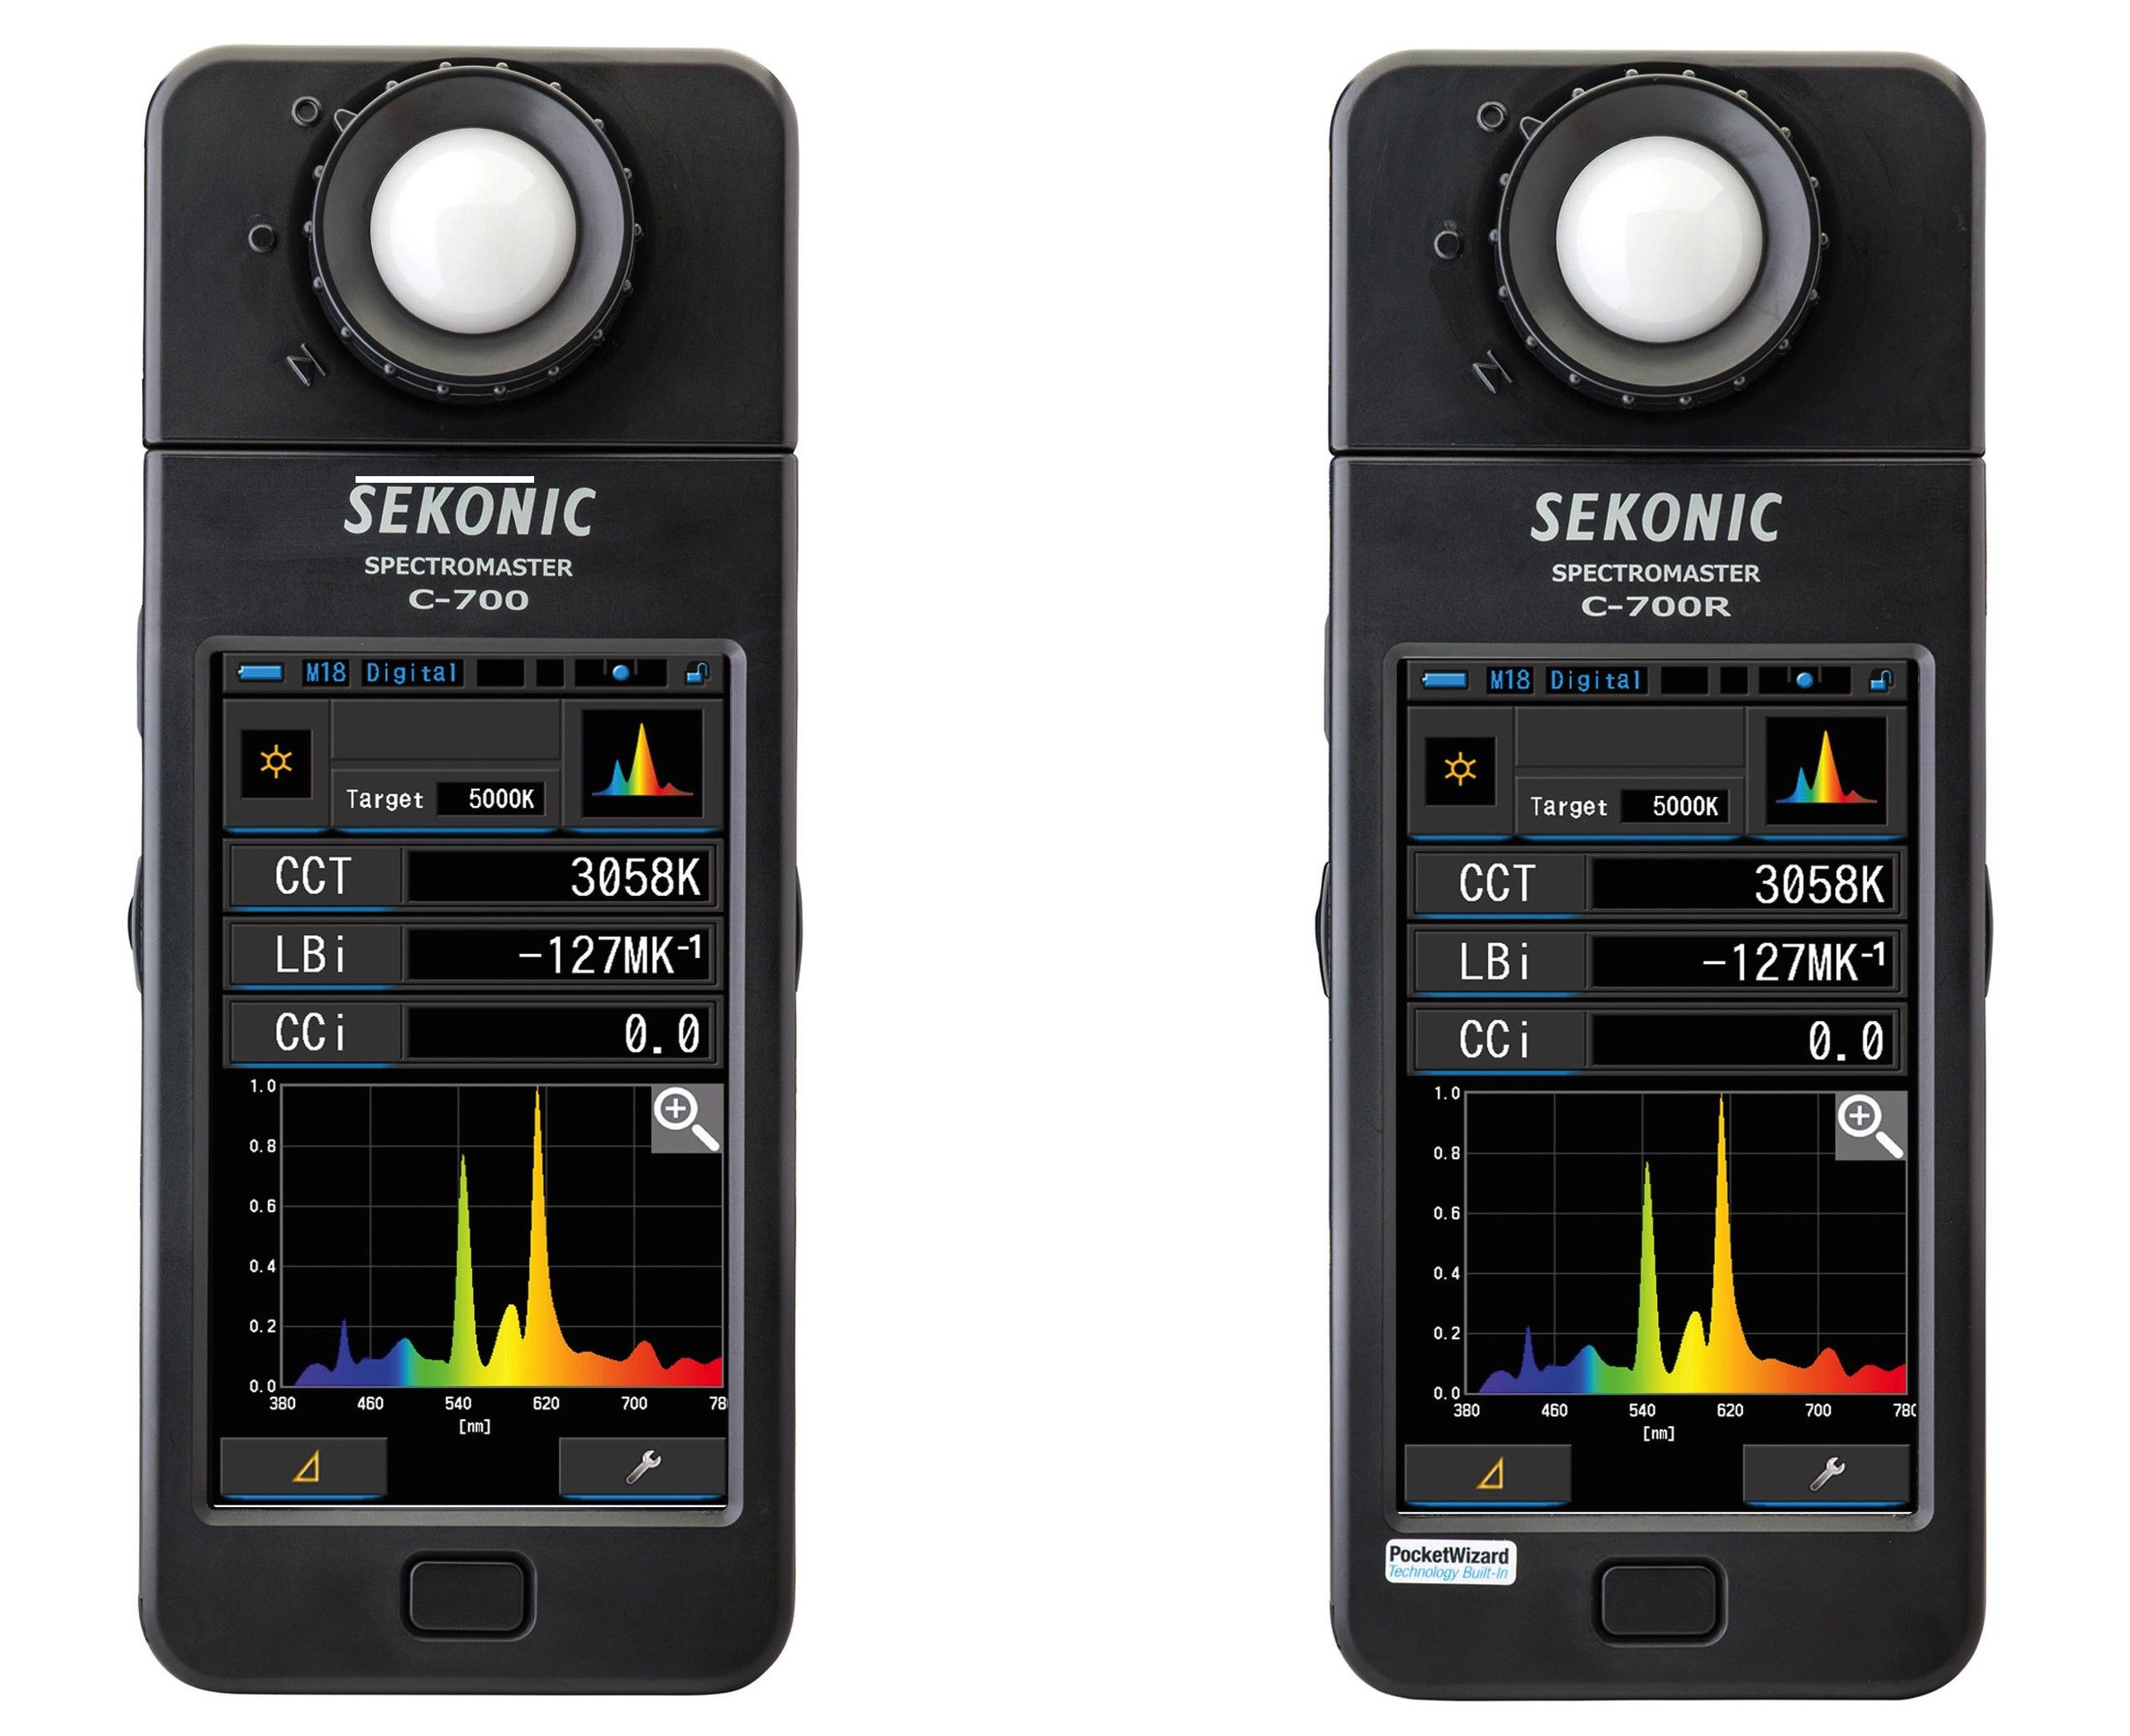 Sekonic C-700 & C-700R SpectroMaster Spectrometer Gives You Total Control  of Color On Set